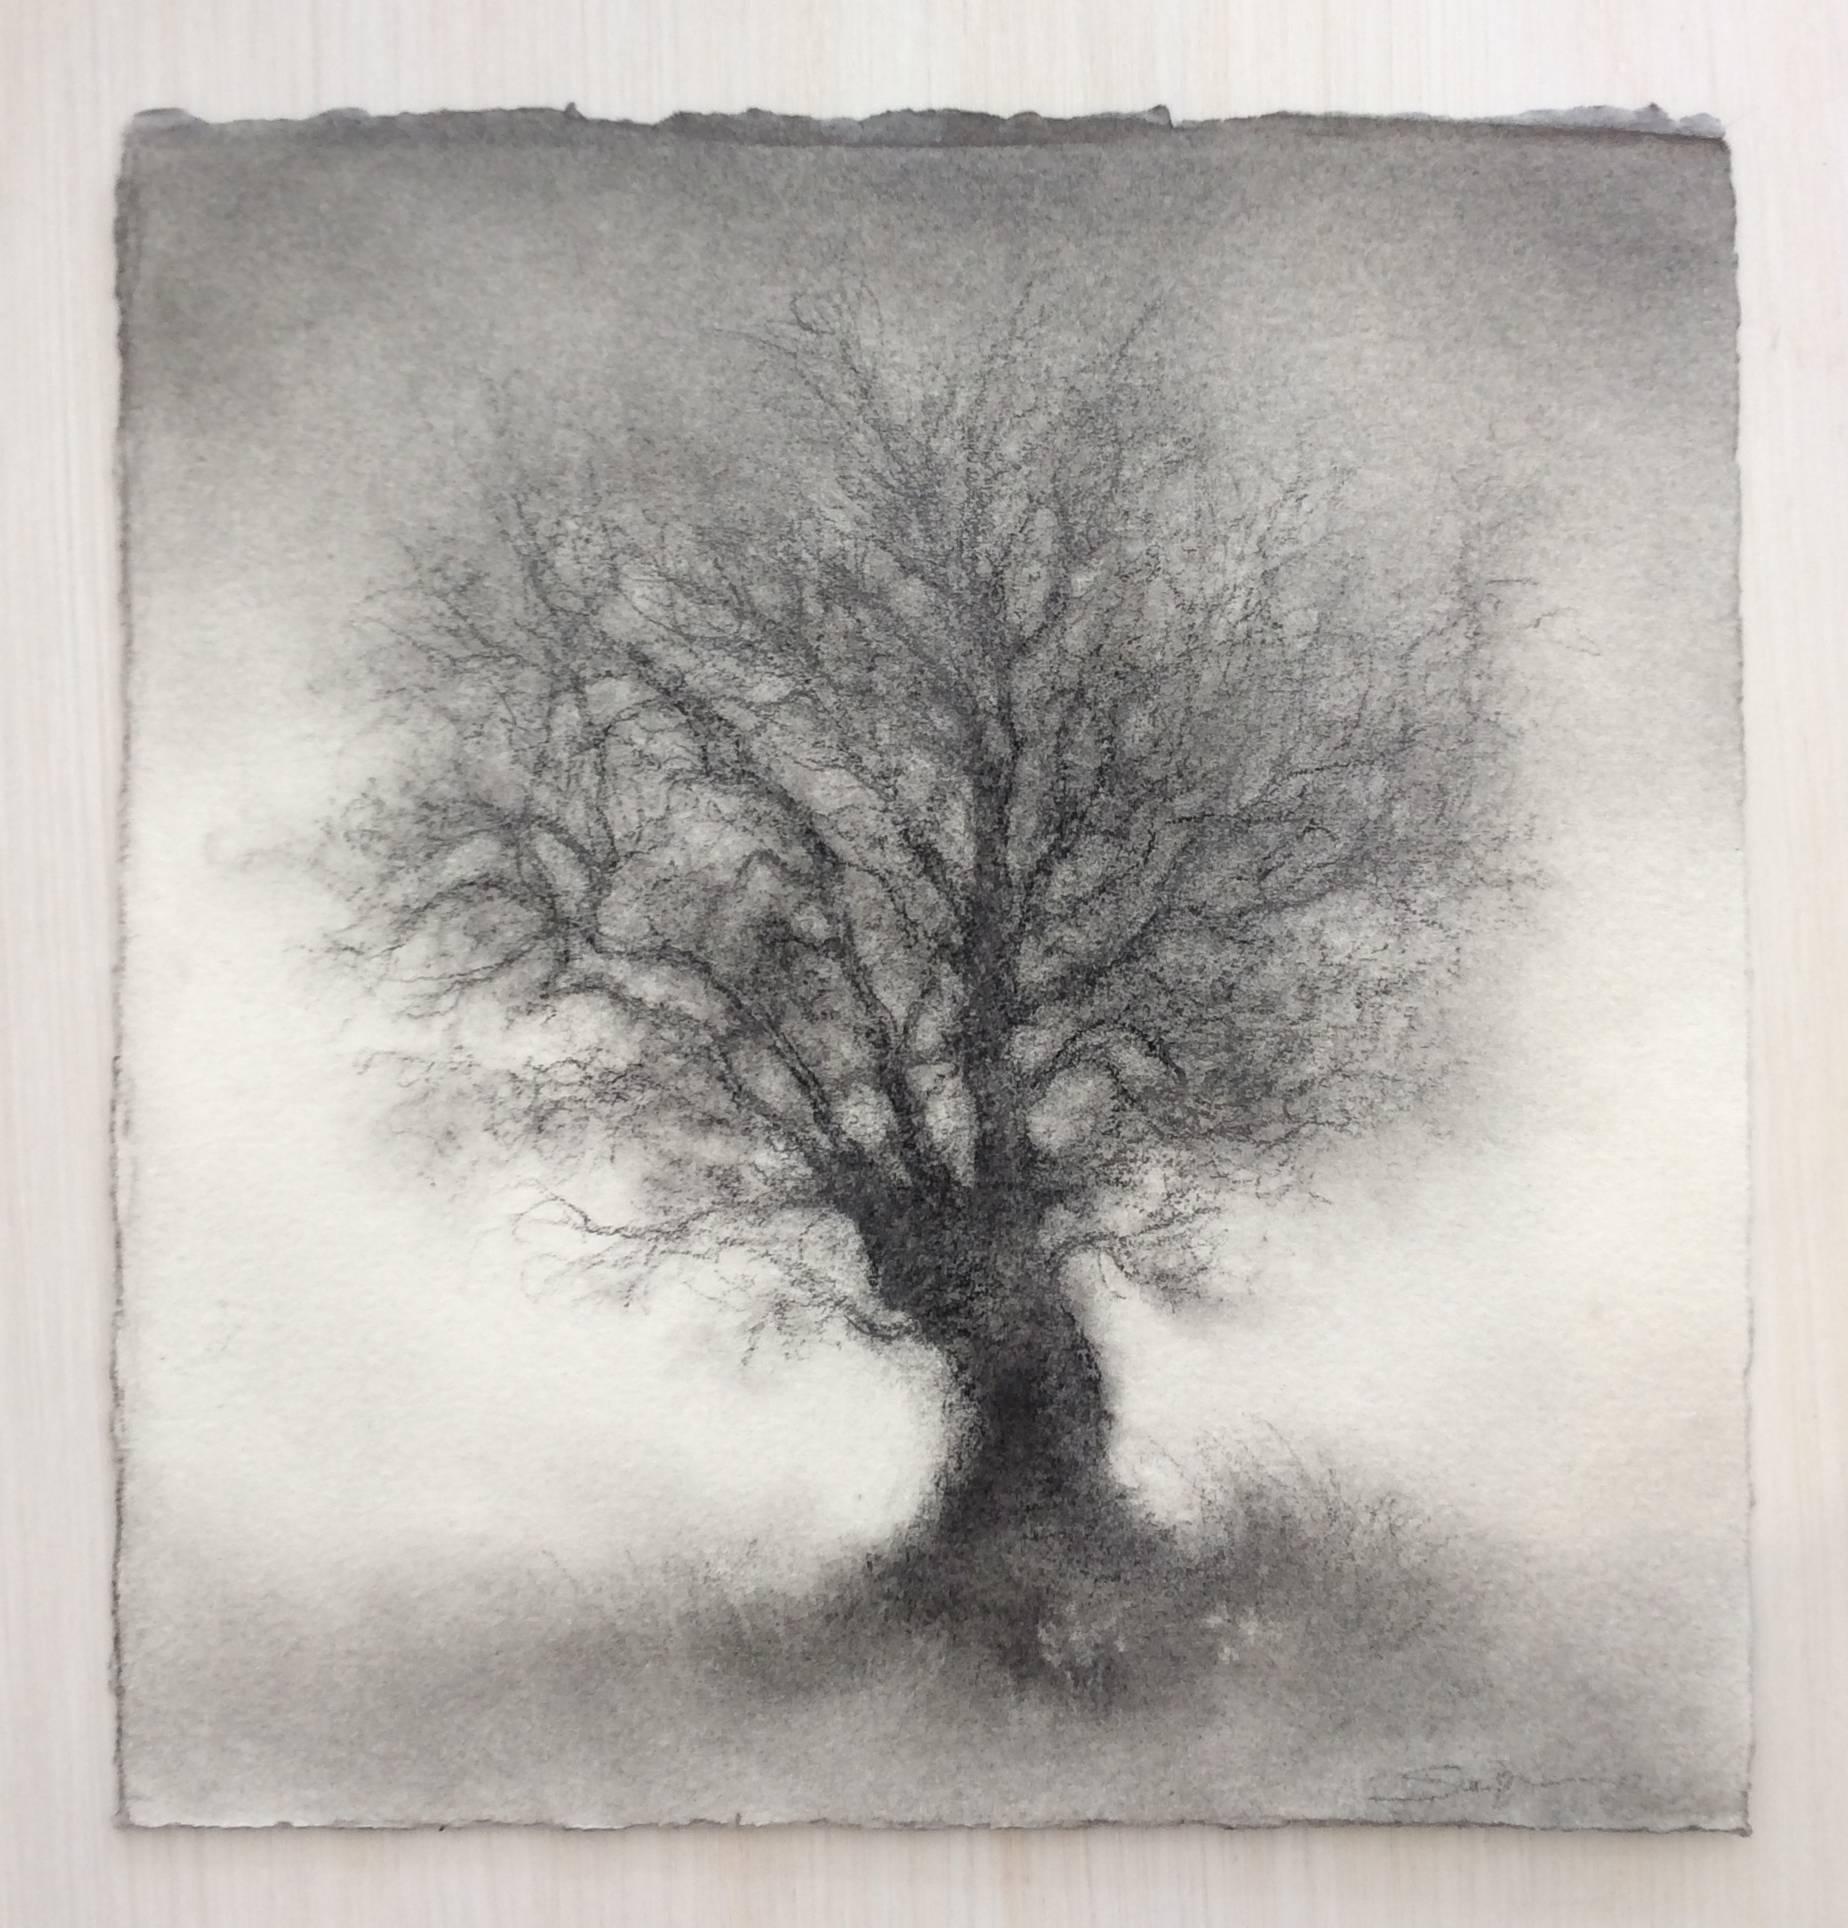 Sapling (Contemporary Realistic Landscape Charcoal Drawing of Single Tree) - Art by Sue Bryan